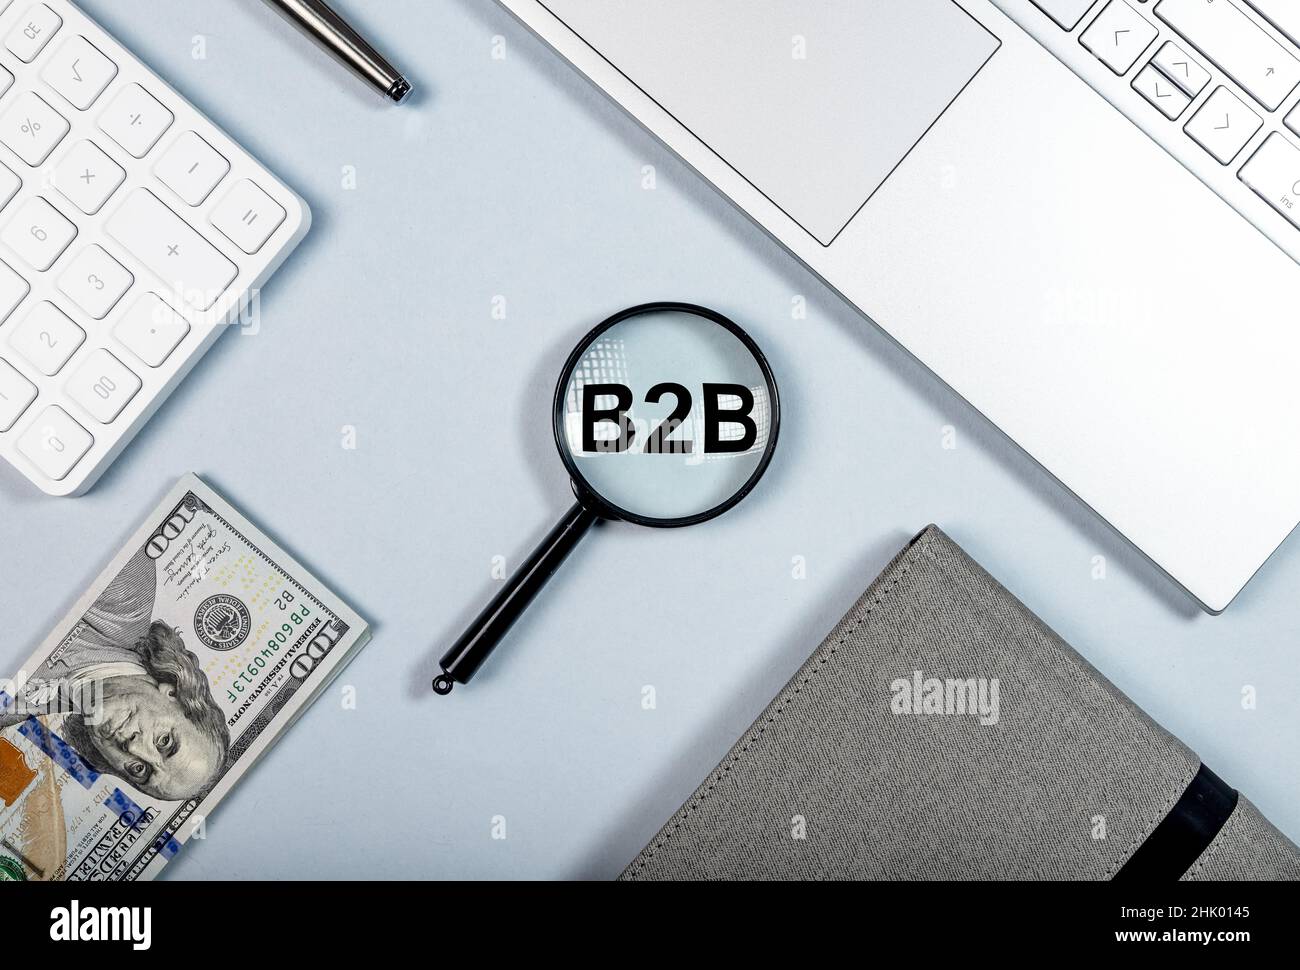 B2B, business-to-business concept, magnifying glass. High quality photo Stock Photo